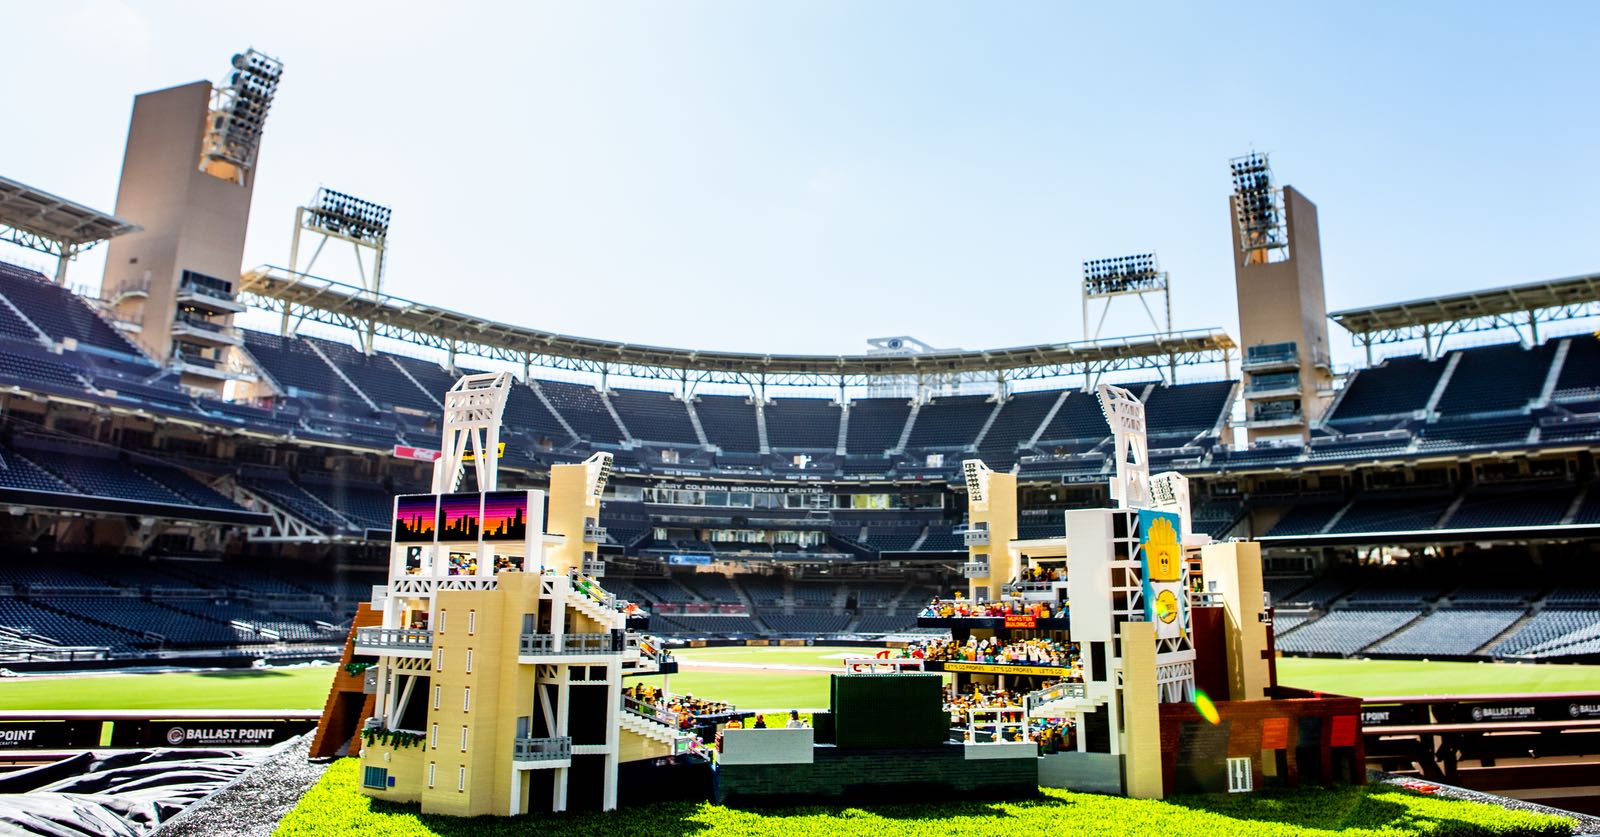 LEGOLAND's Petco Park model at Petco Park for the new San Diego Miniland launching this Spring